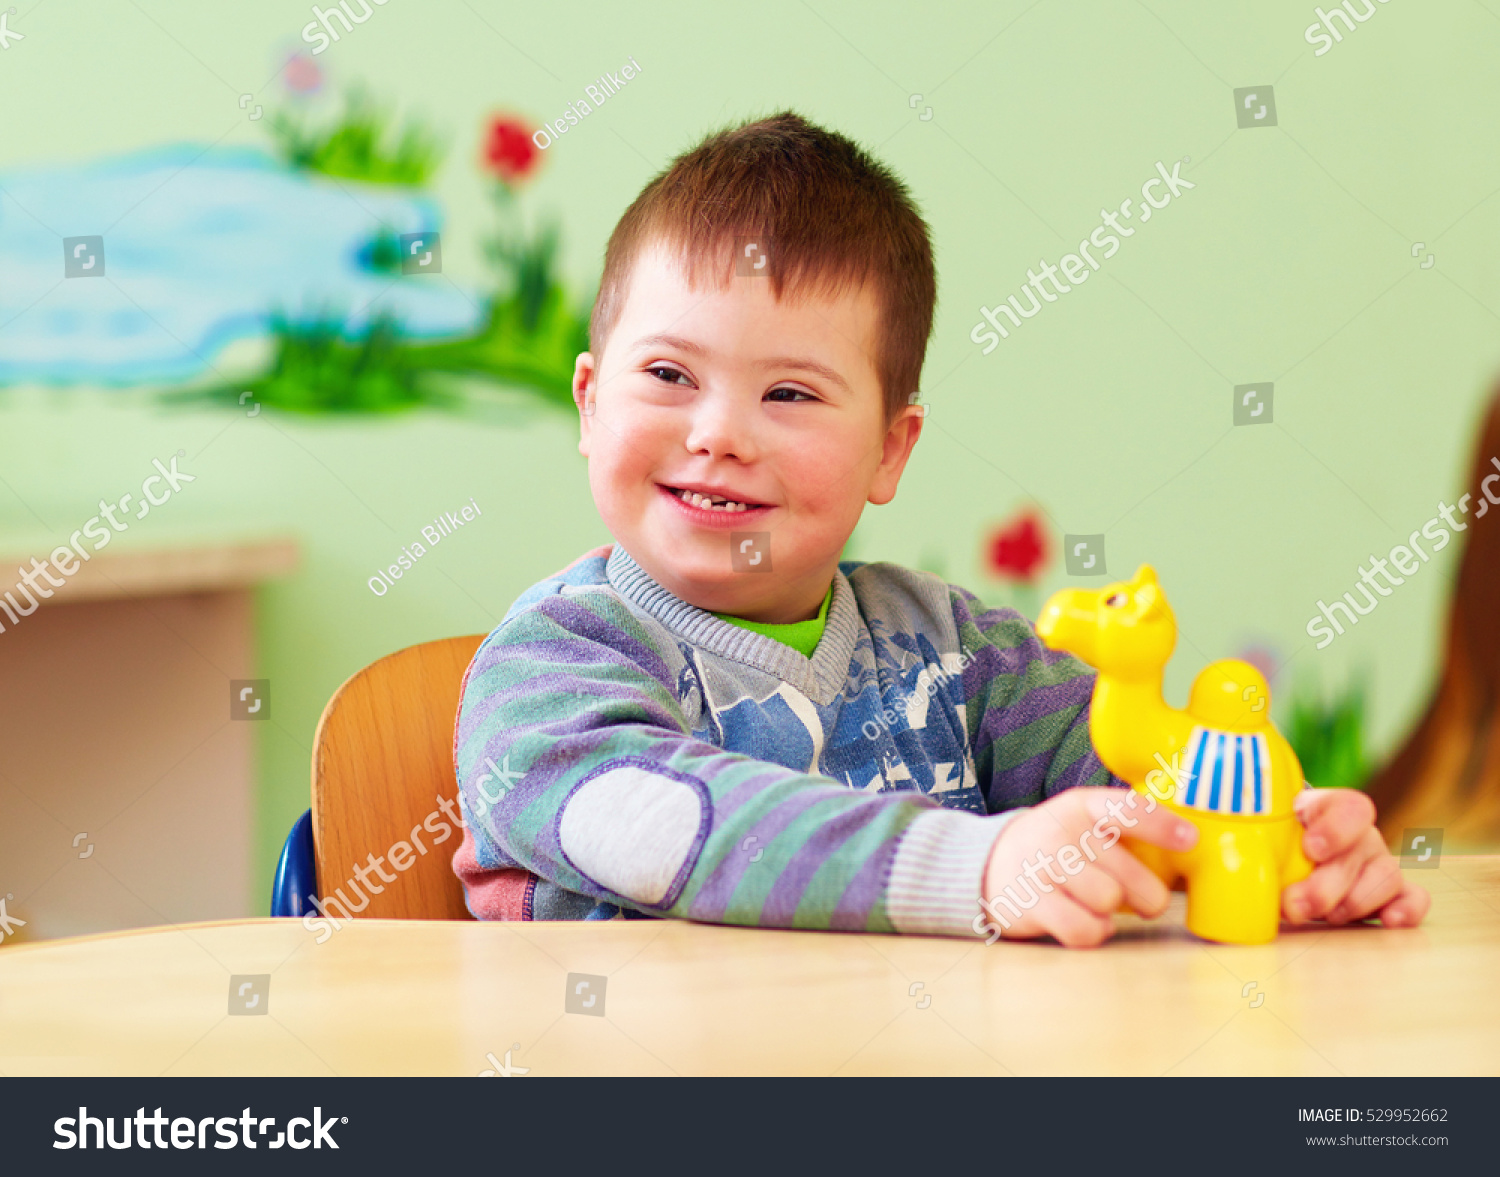 cute kid with down's syndrome playing in kindergarten #529952662